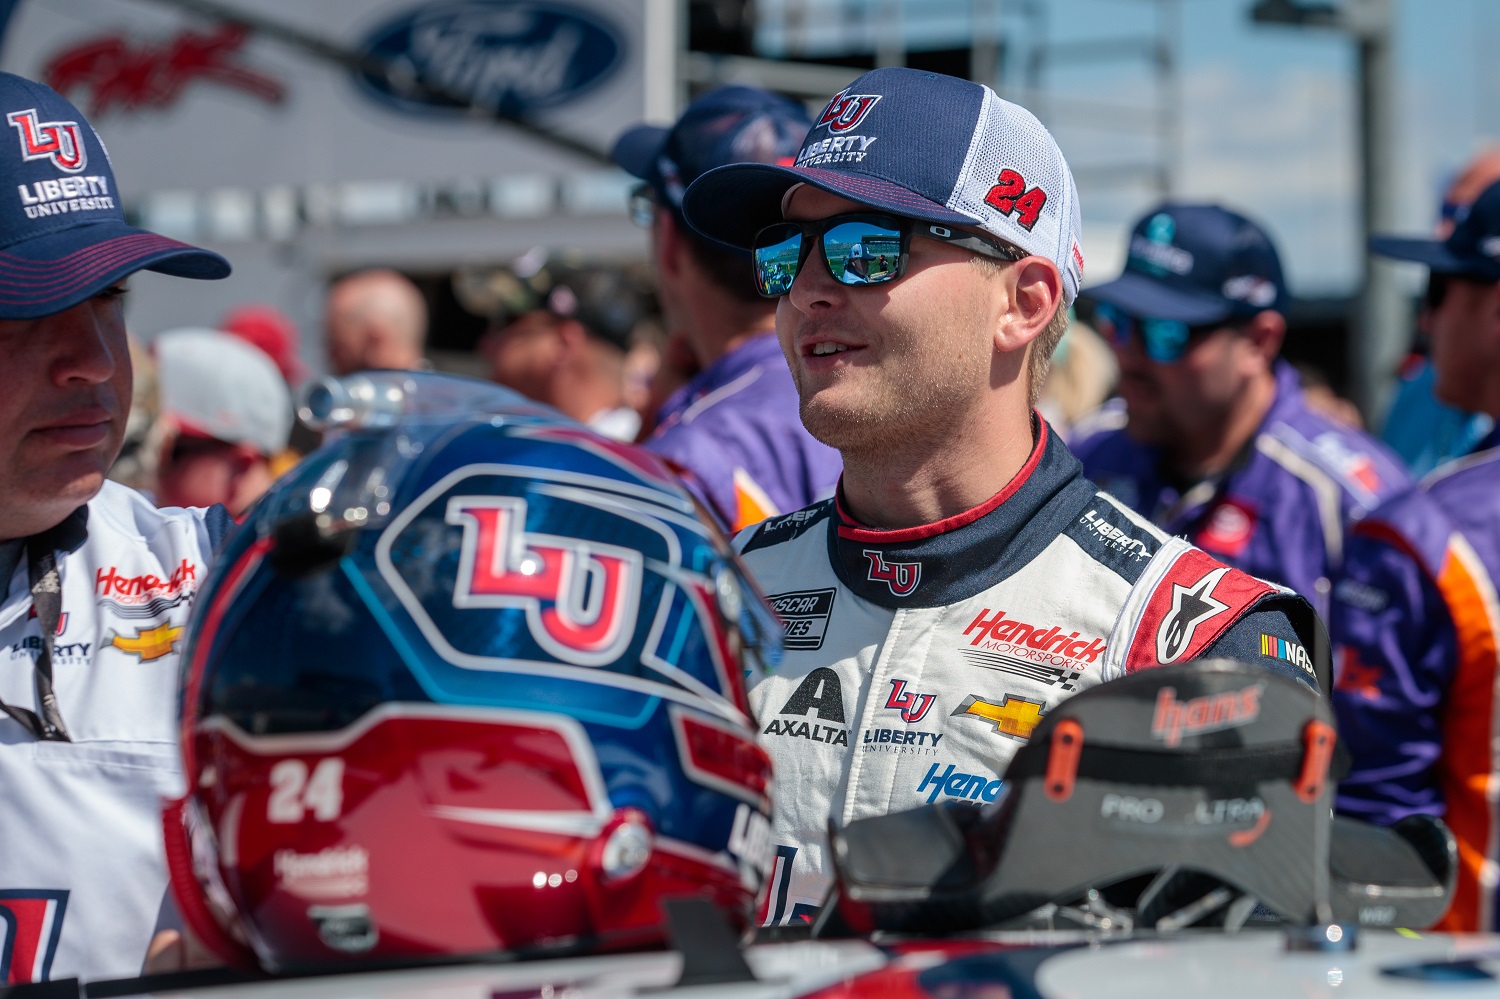 William Byron speaks with his crew on pit road prior to the NASCAR Cup Series Hollywood Casino 400 at Kansas Speedway.